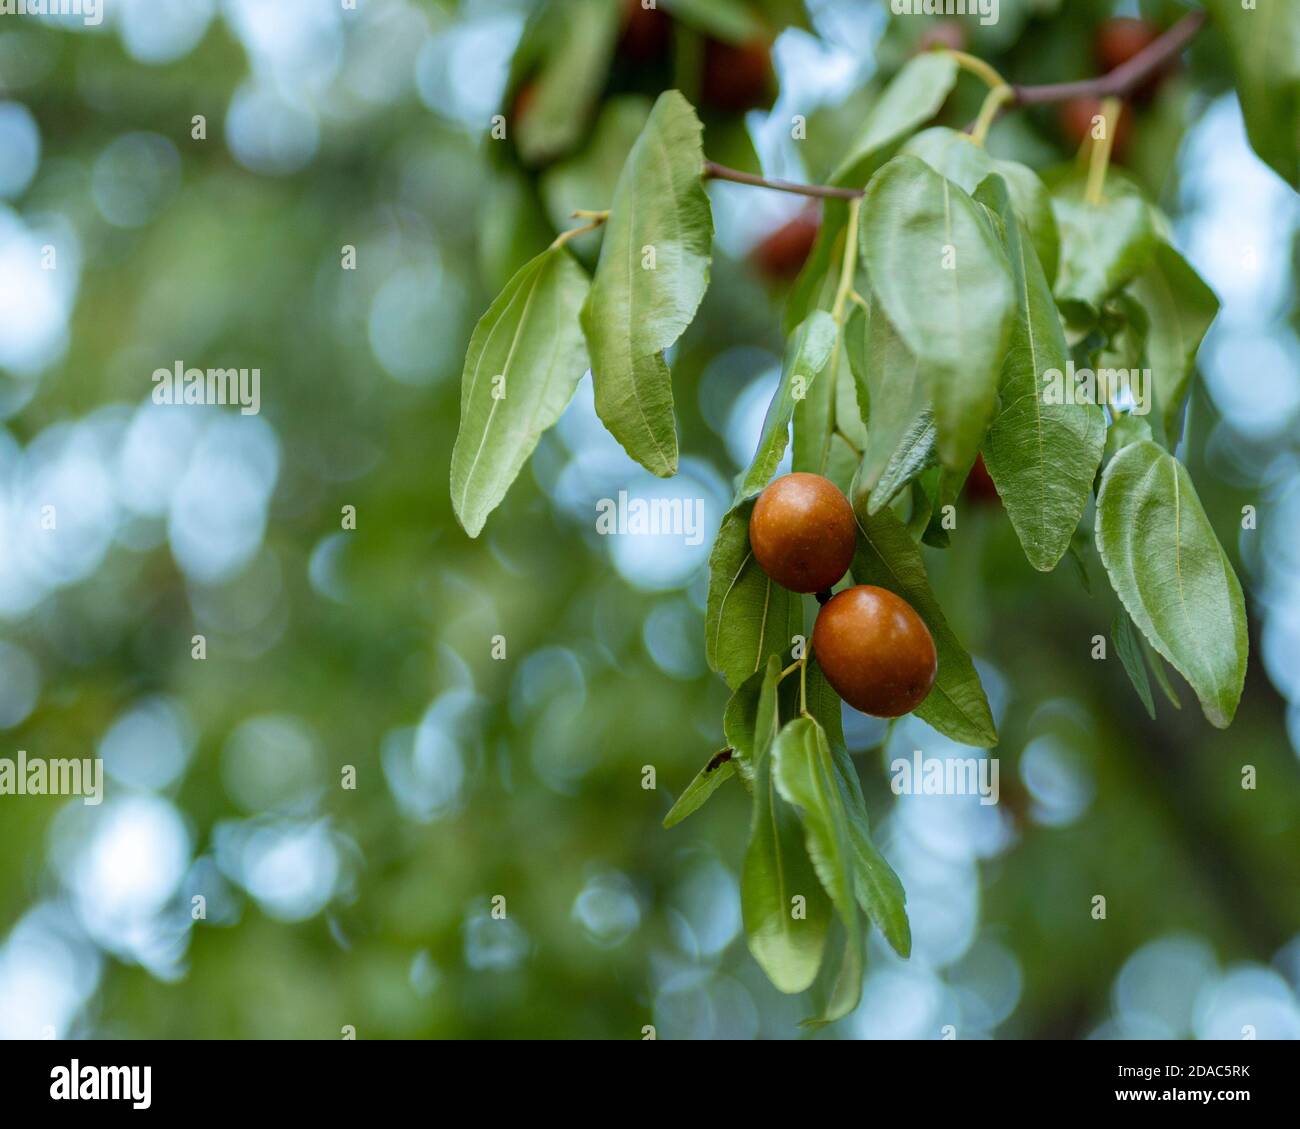 Ziziphus jujuba or jujube red date or Chinese date fruits ripening on a tree Stock Photo